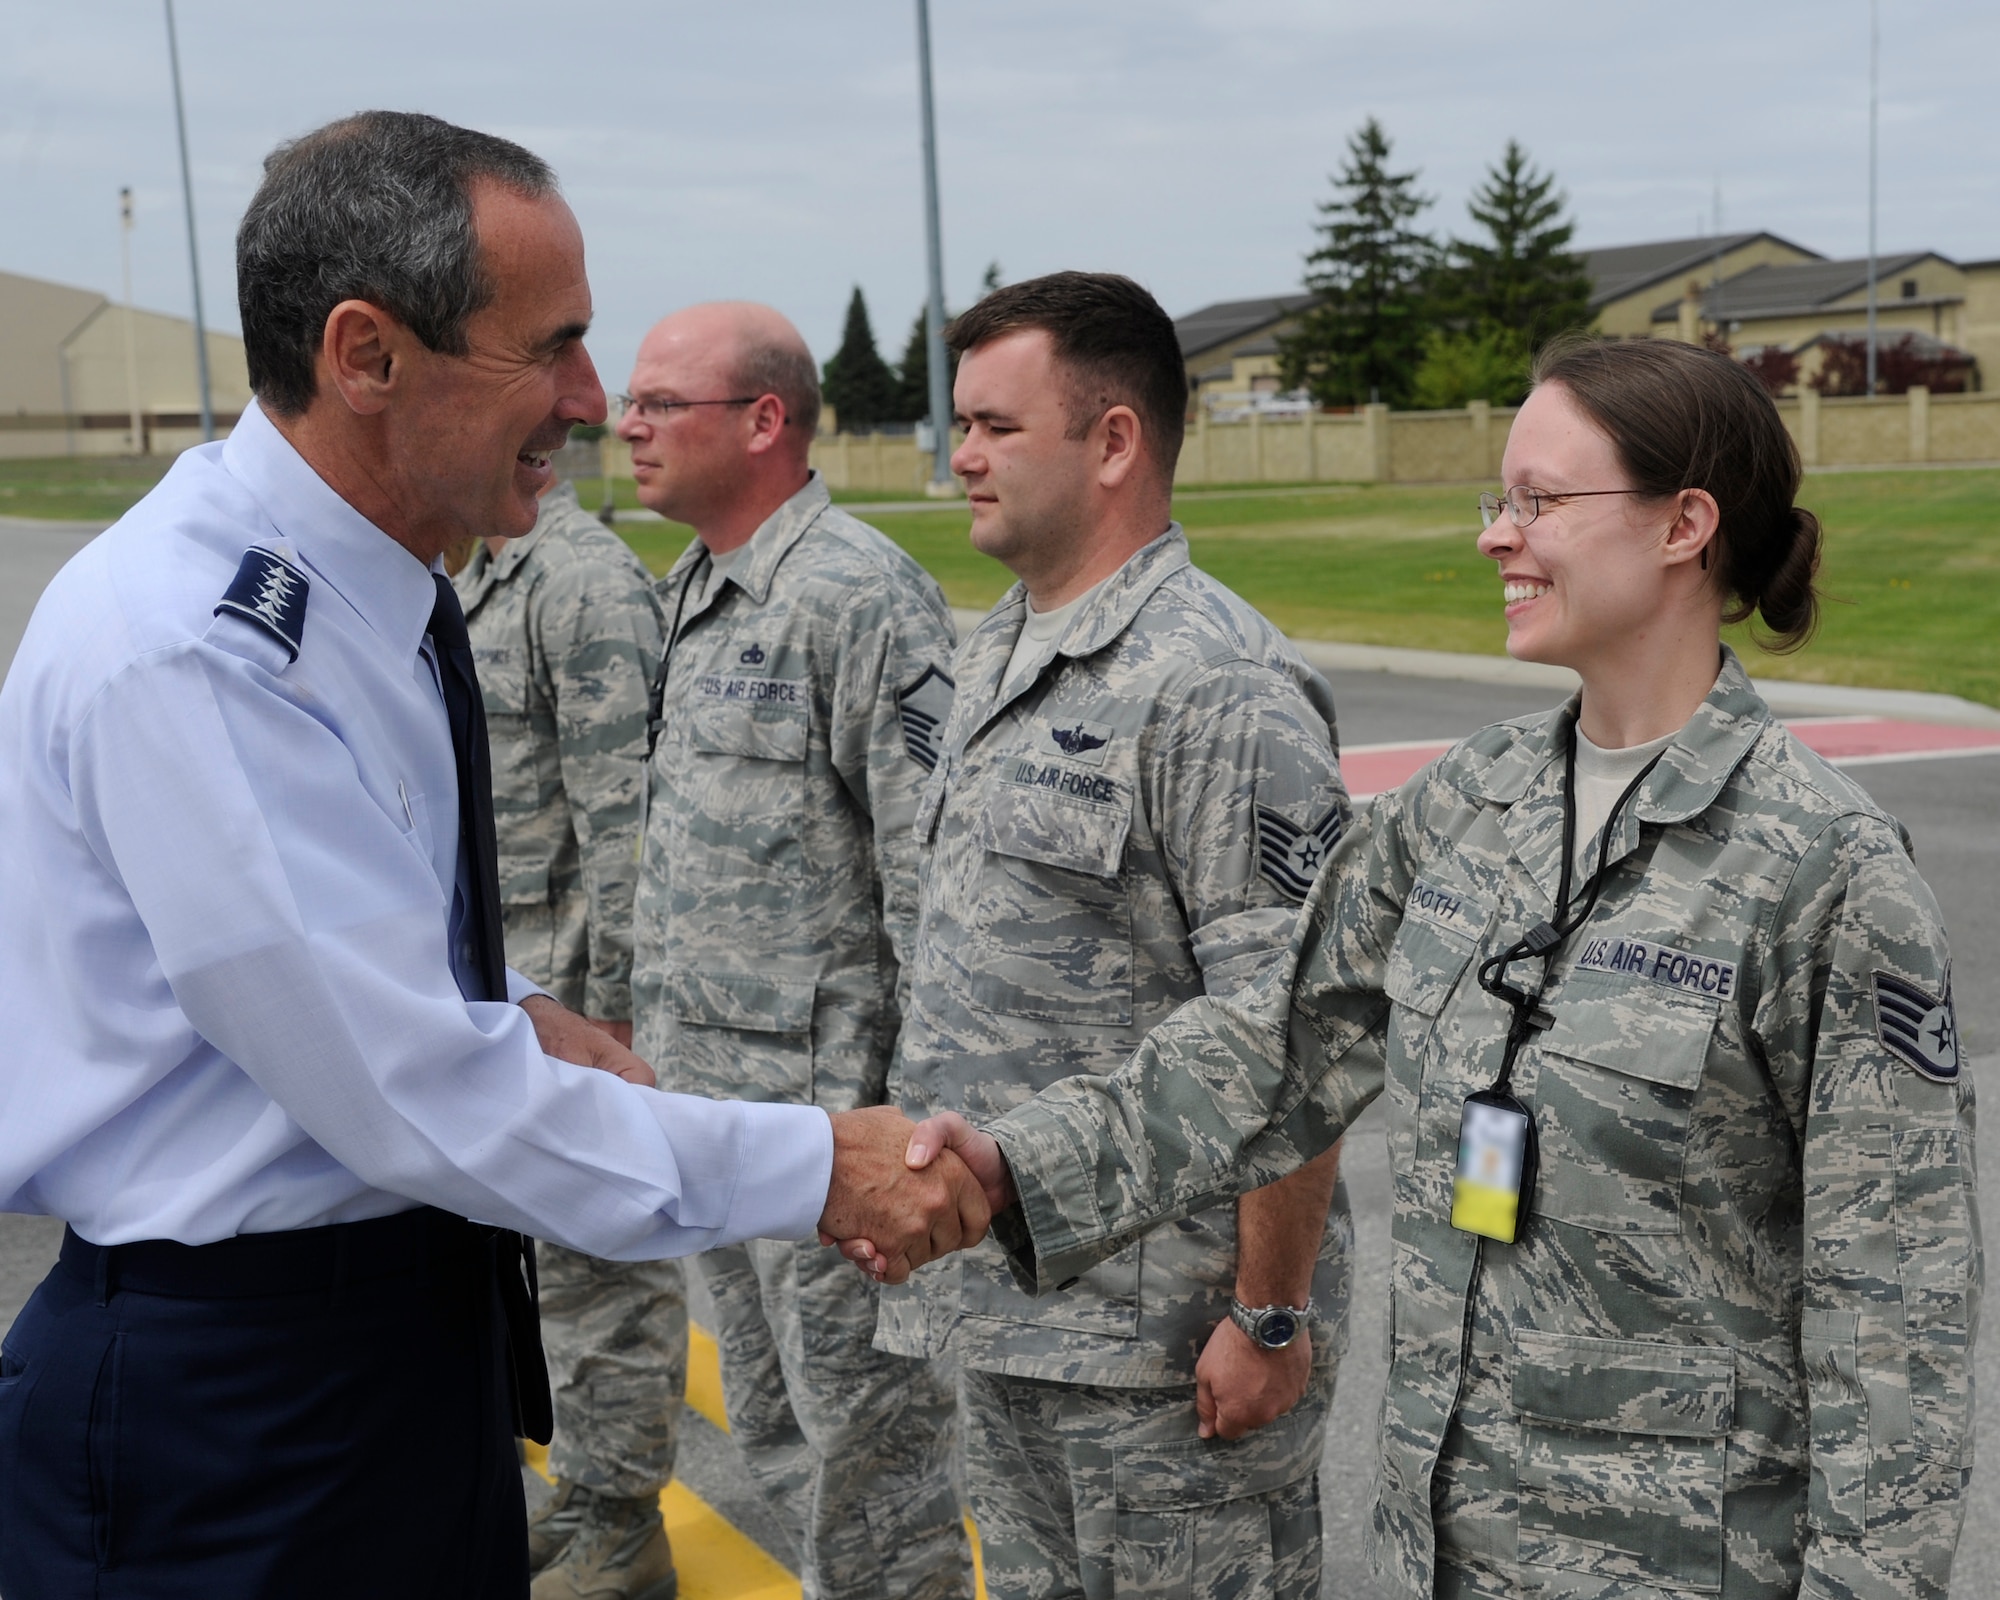 Gen. Raymond Johns, Jr., Air Mobility Command commander, greets Staff Sgt. Christine Tooth, 92nd Air Refueling Wing protocol specialist, during a recent visit to Fairchild Air Force Base, Wash., May 20, 2012. If something needs to be done, whether it’s picking up trash, pitching luggage or washing vehicles and someone else hasn't done their job, then the wing’s protocol office is there getting the mission done. (U.S. Air Force photo by Airman 1st Class Ryan Zeski/Released)